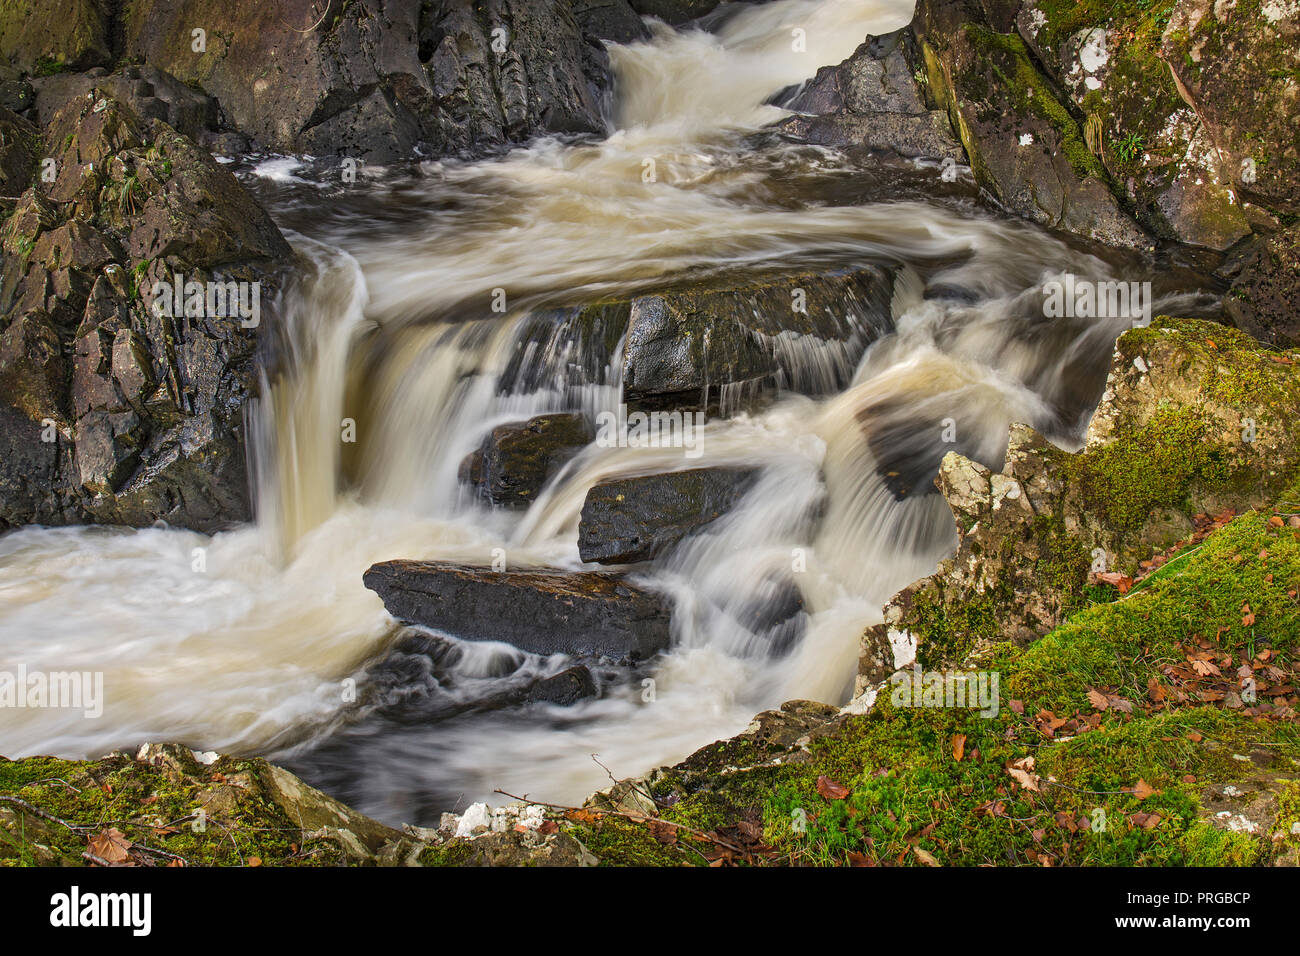 A section of the turbulent Afon (River) Gamlan flowing through the Coed Ganllwyd National Nature Reserve in the Coed-y-Brenin Forest Stock Photo